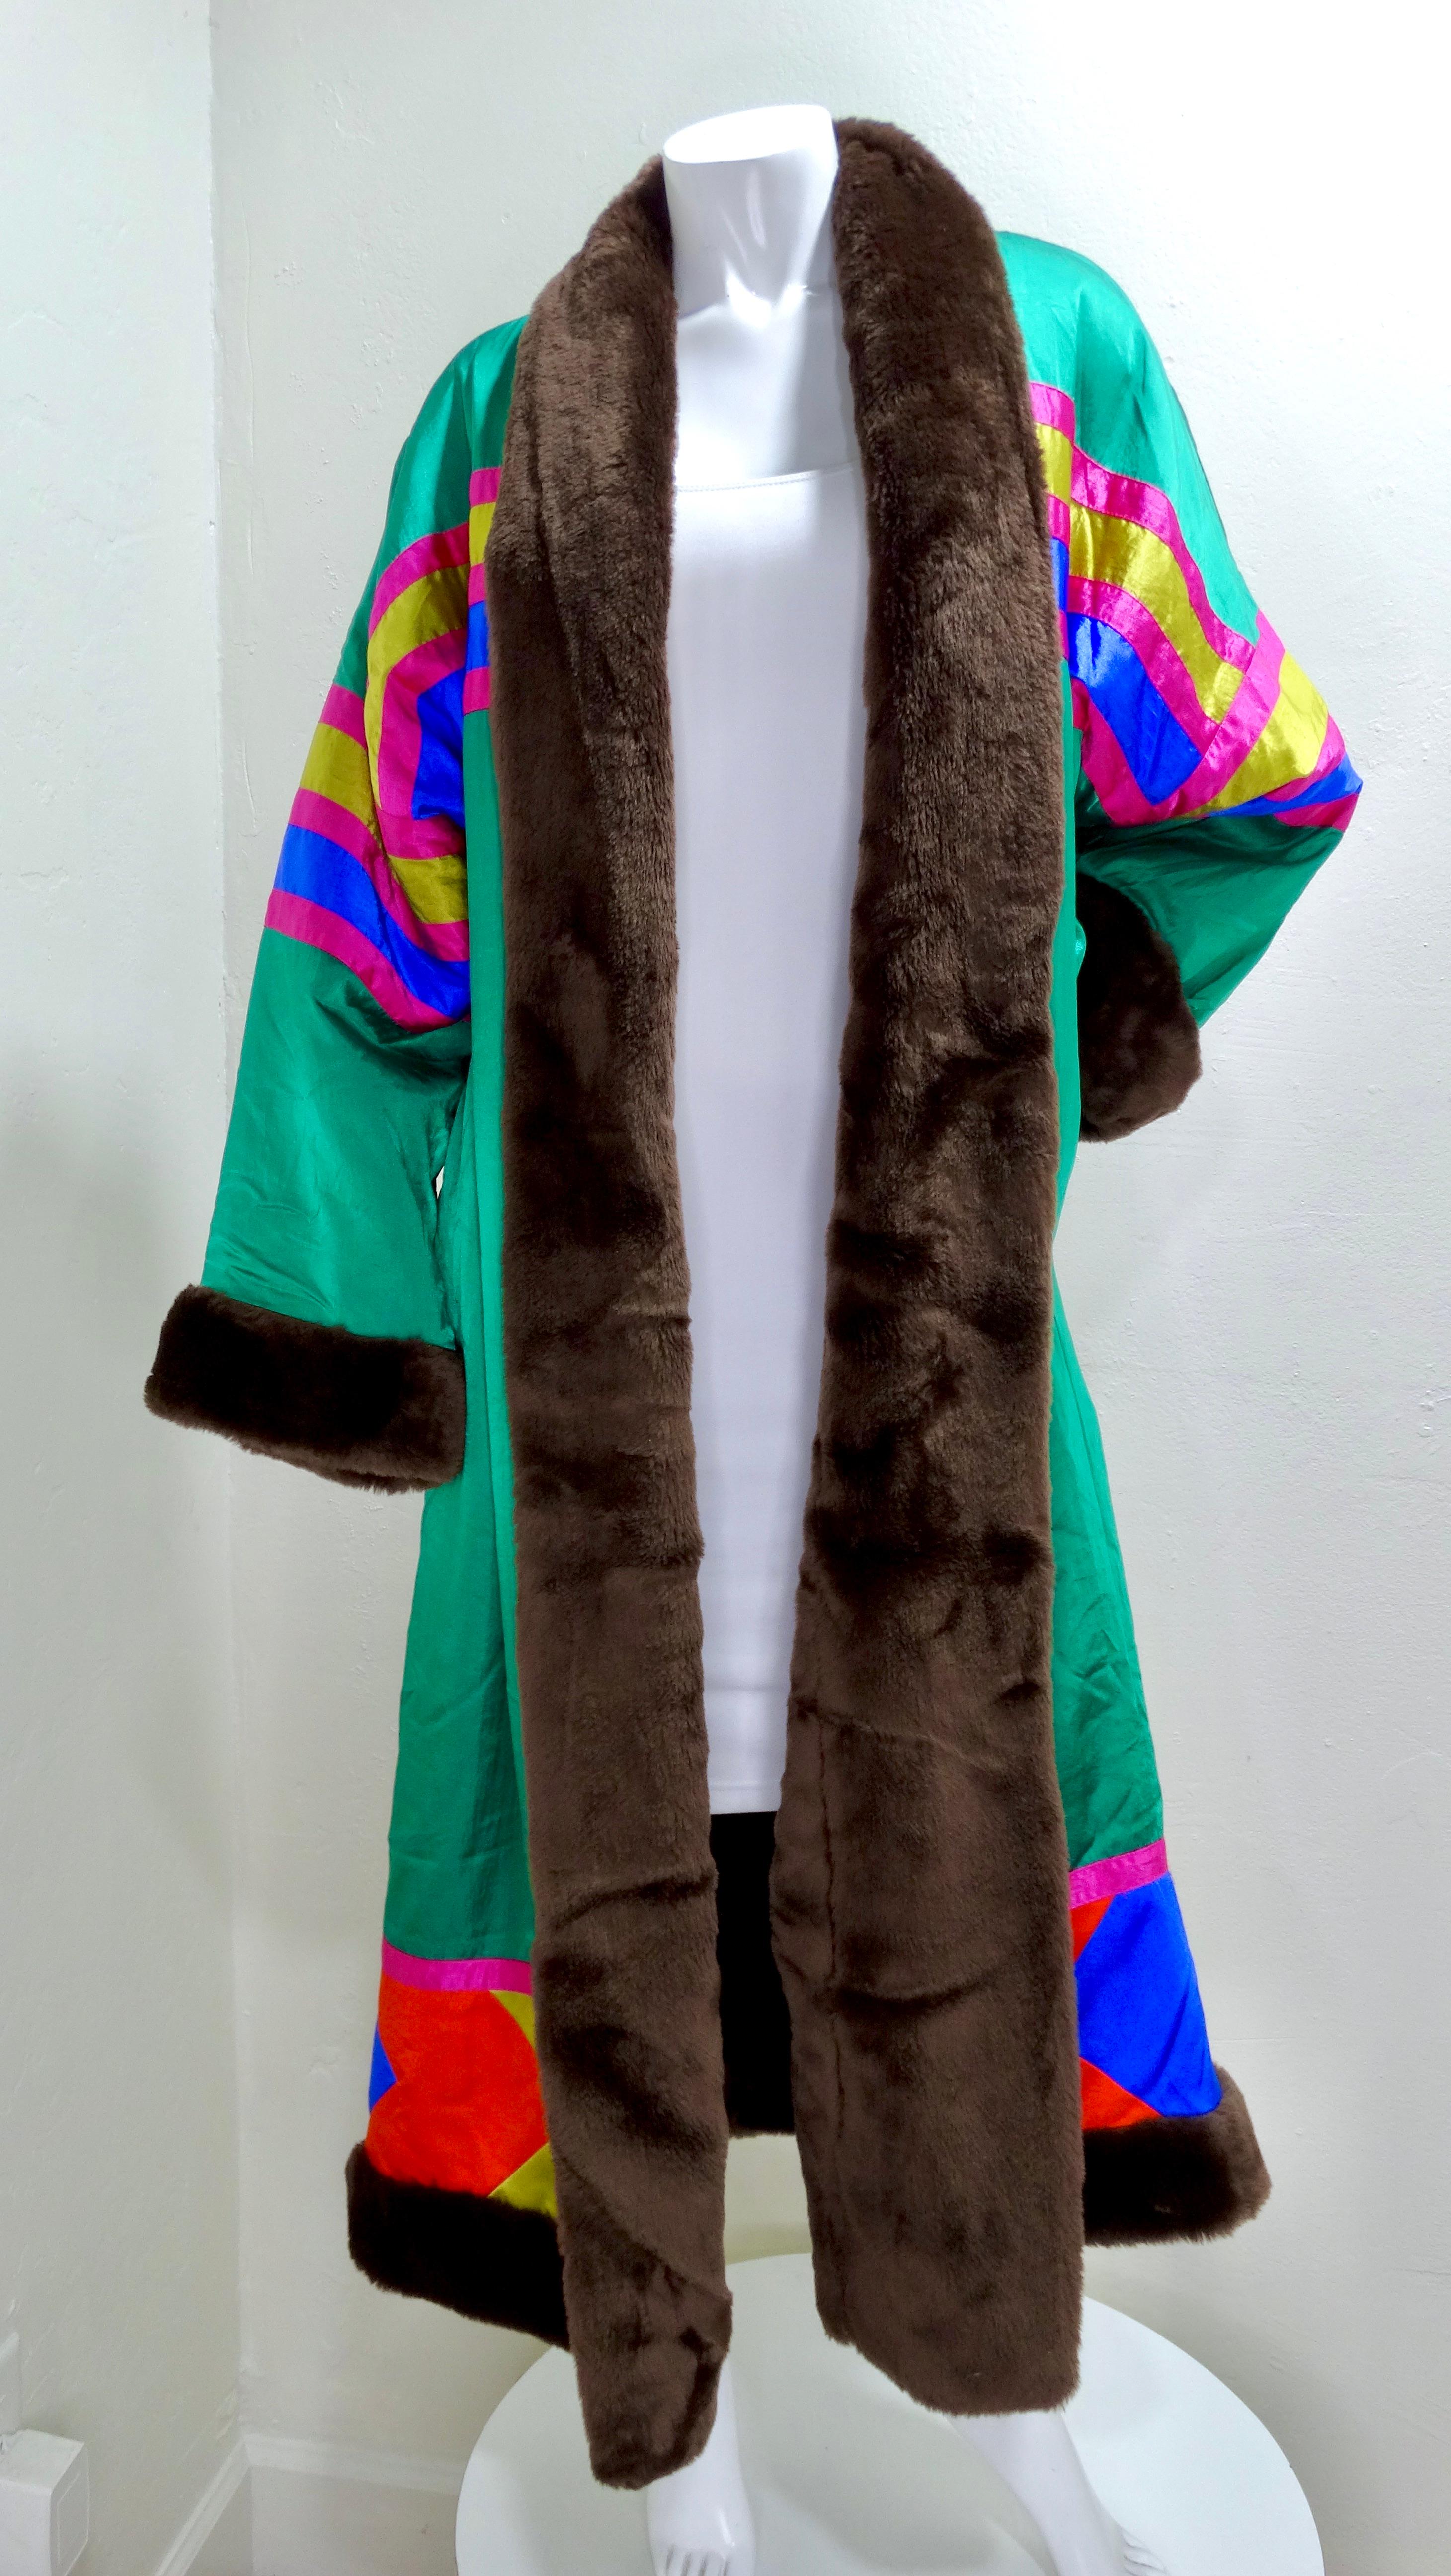 There's no doubt you will feel your most powerful self in this color block coat. Beautifully vibrant colors make up the whole coat contrasted with a rich chocolate brown fur. This coat can also be worn reversed. The oversized fit will be perfect for